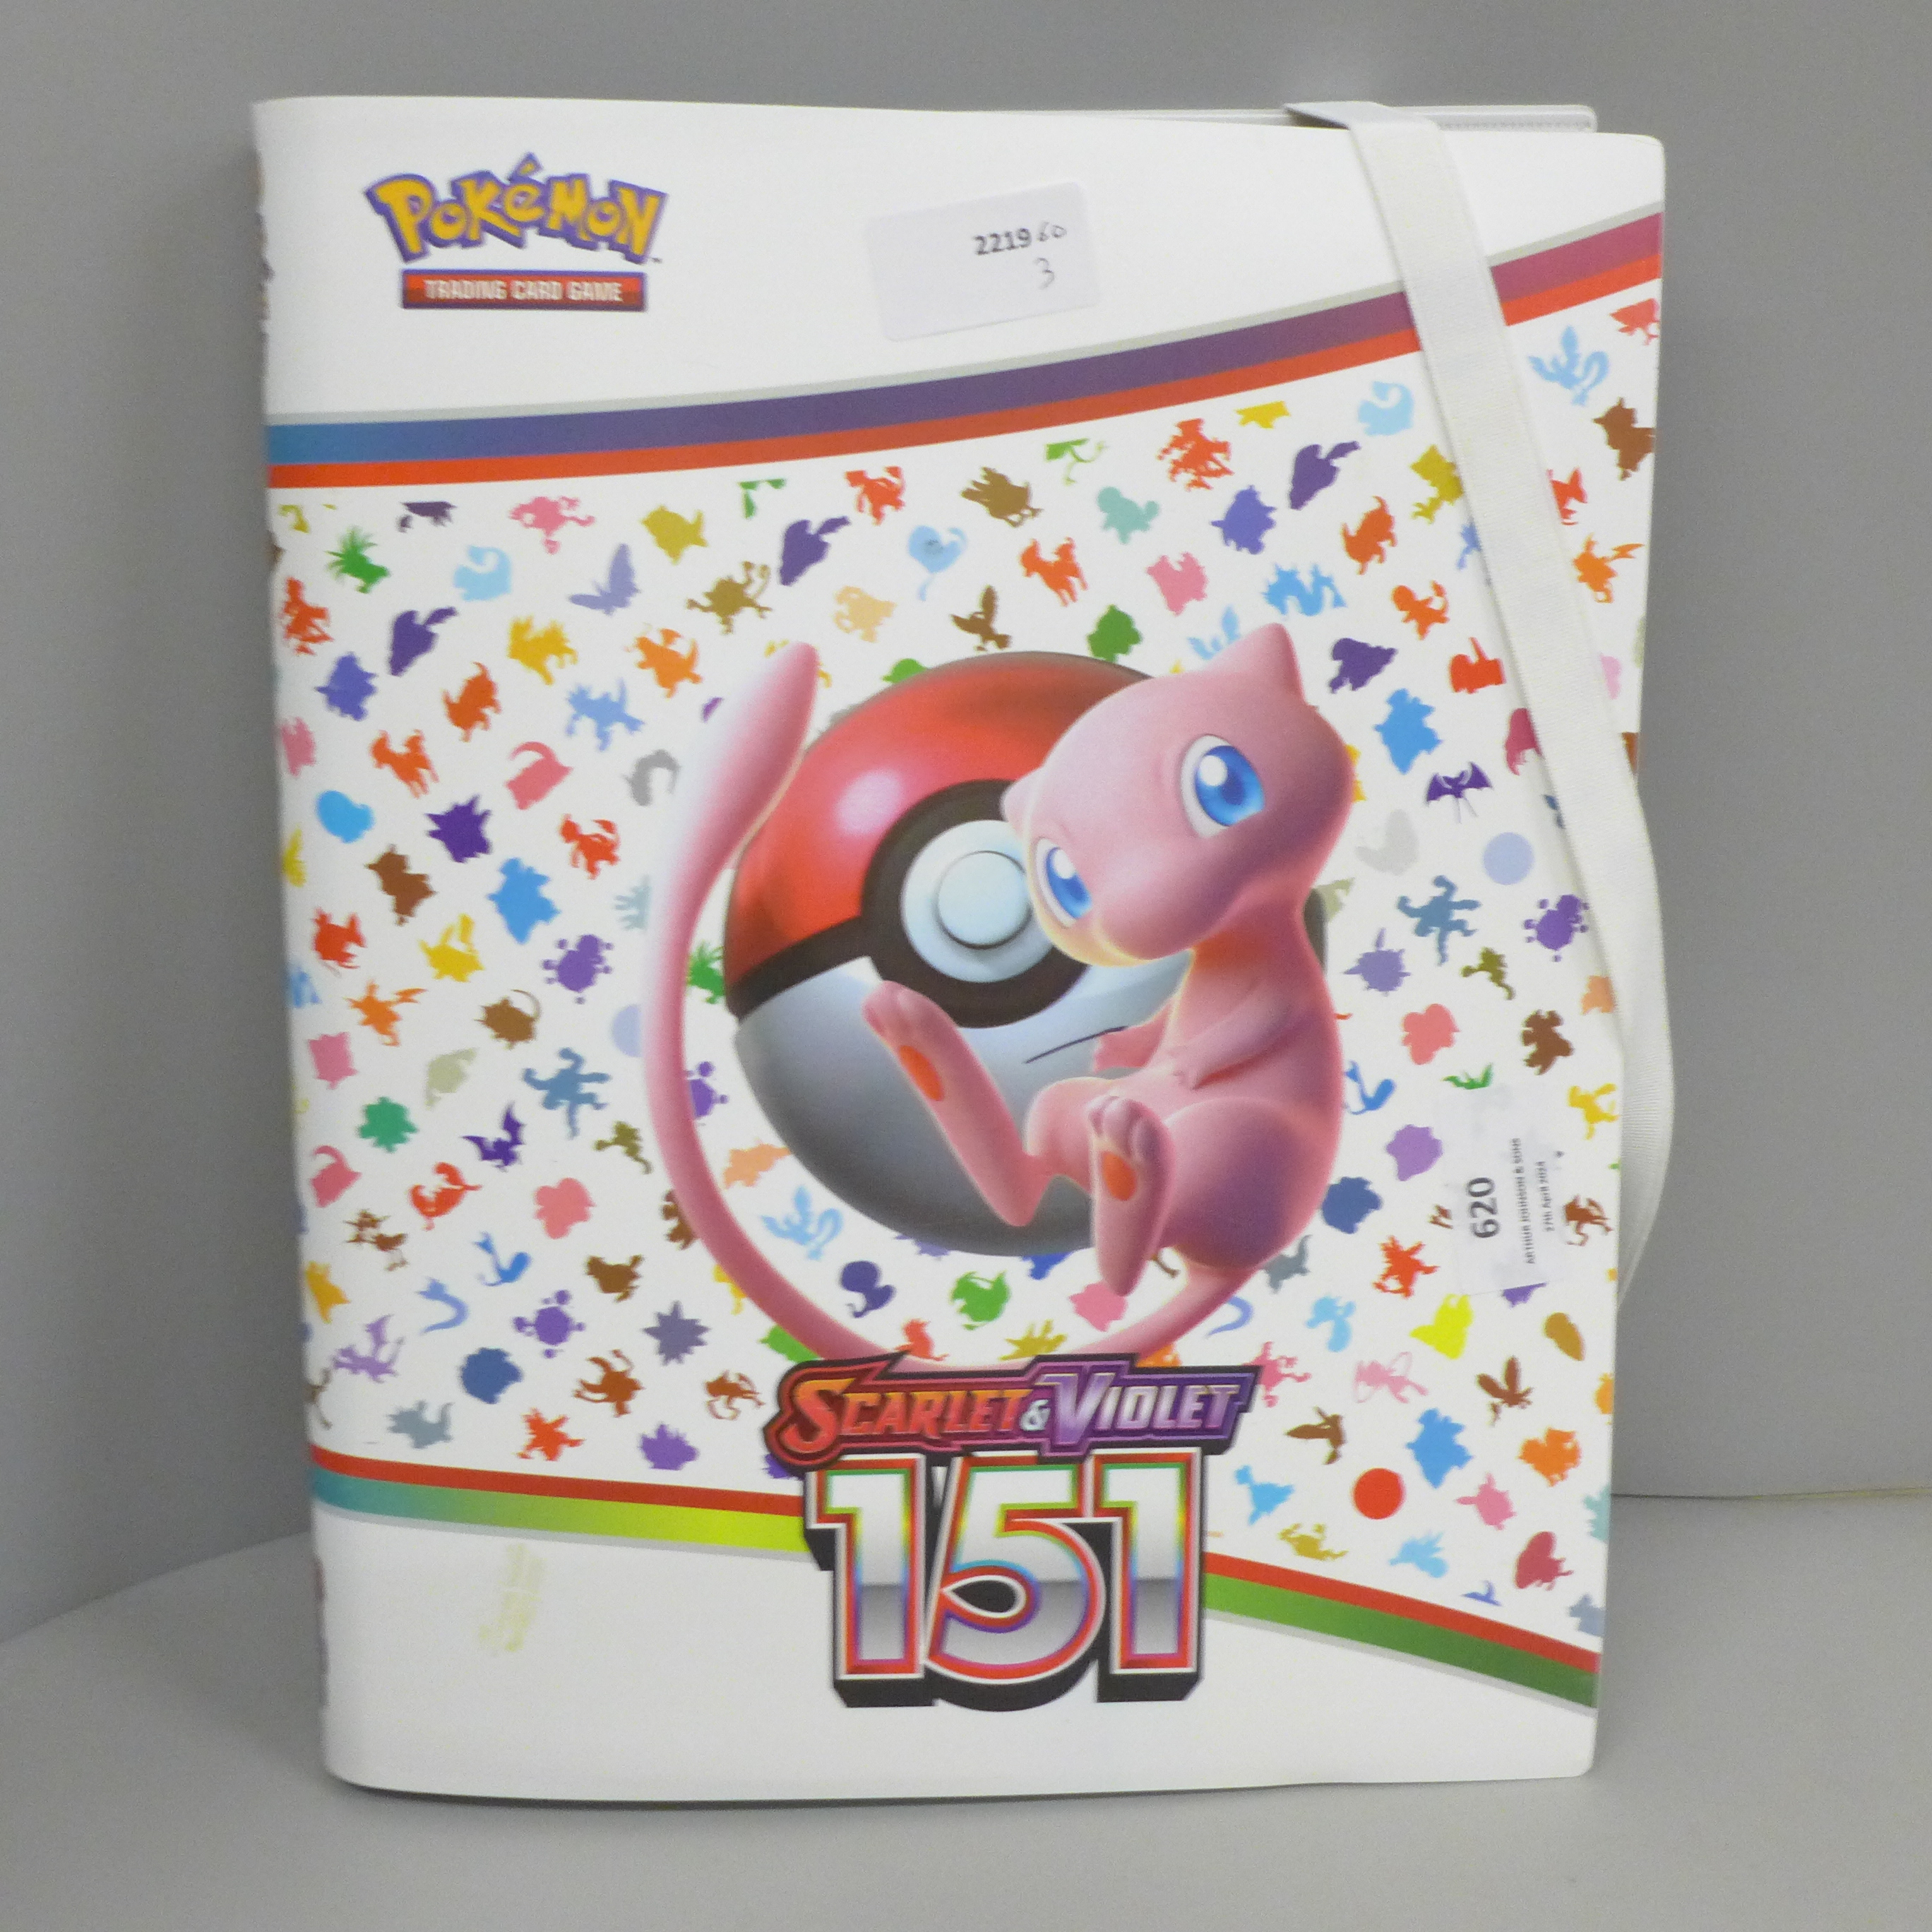 An album of approximately 270 Pokemon cards - Image 6 of 6